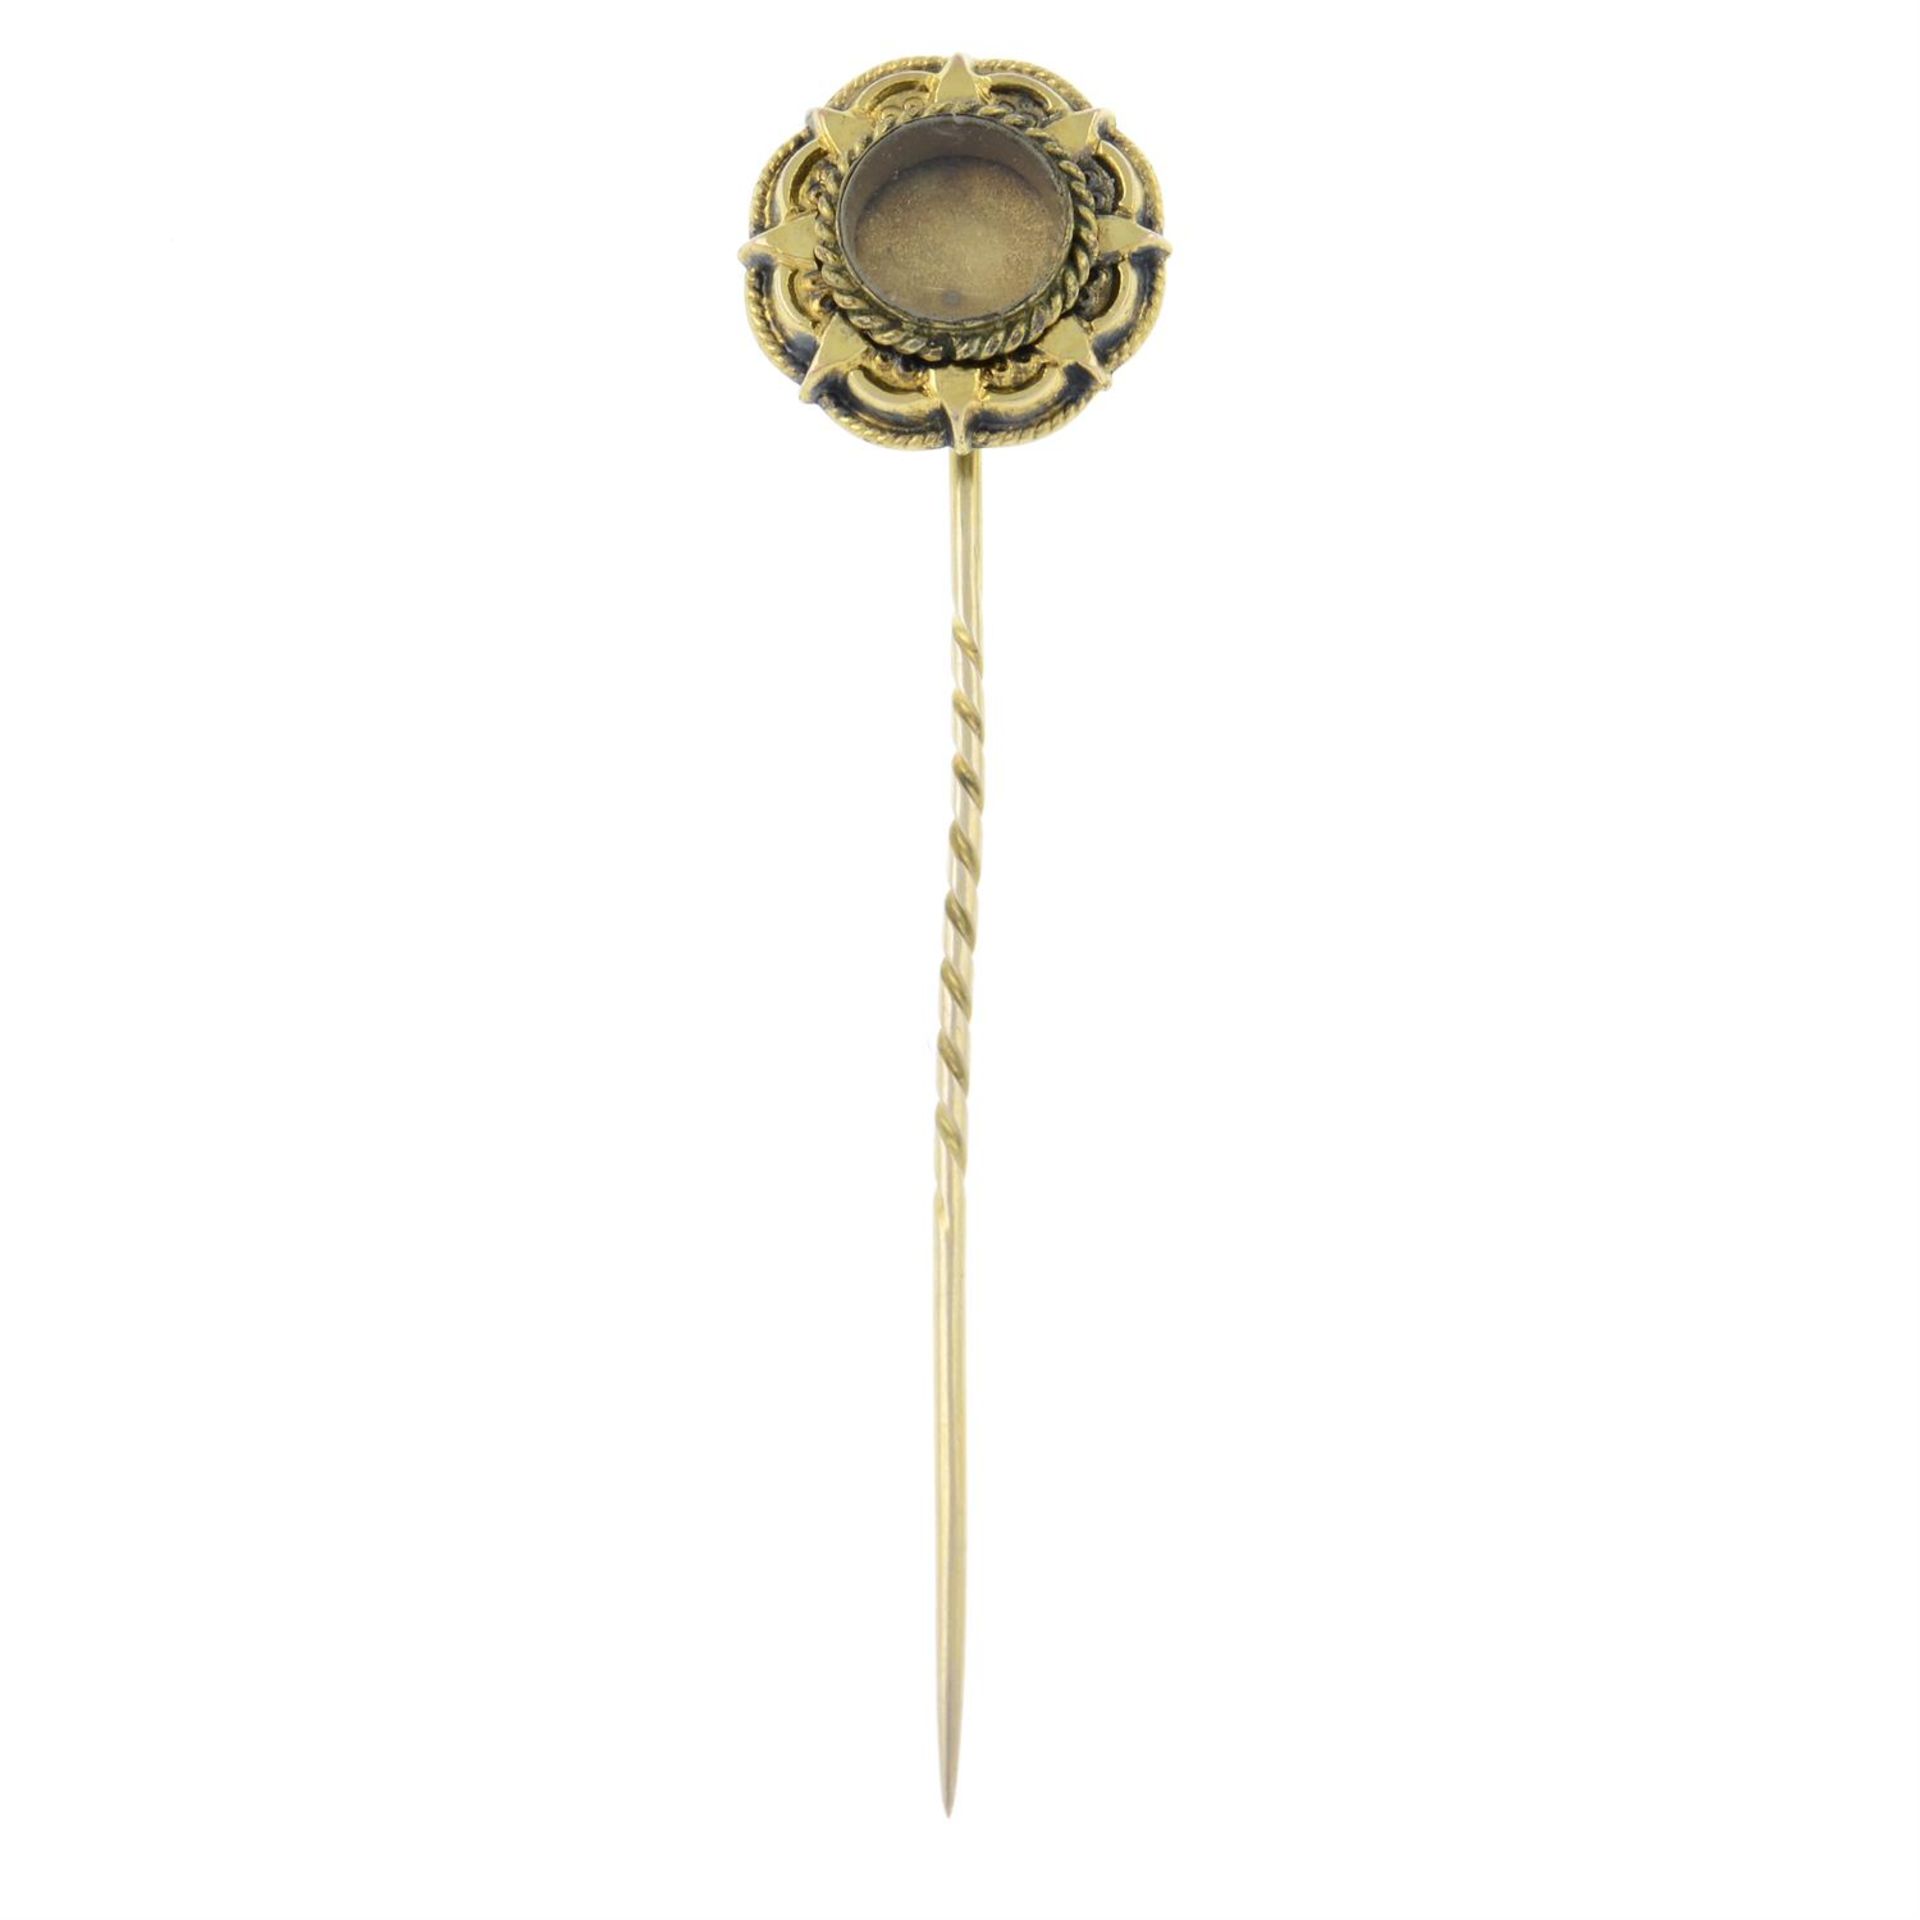 A late 19th century gold mourning locket stickpin.